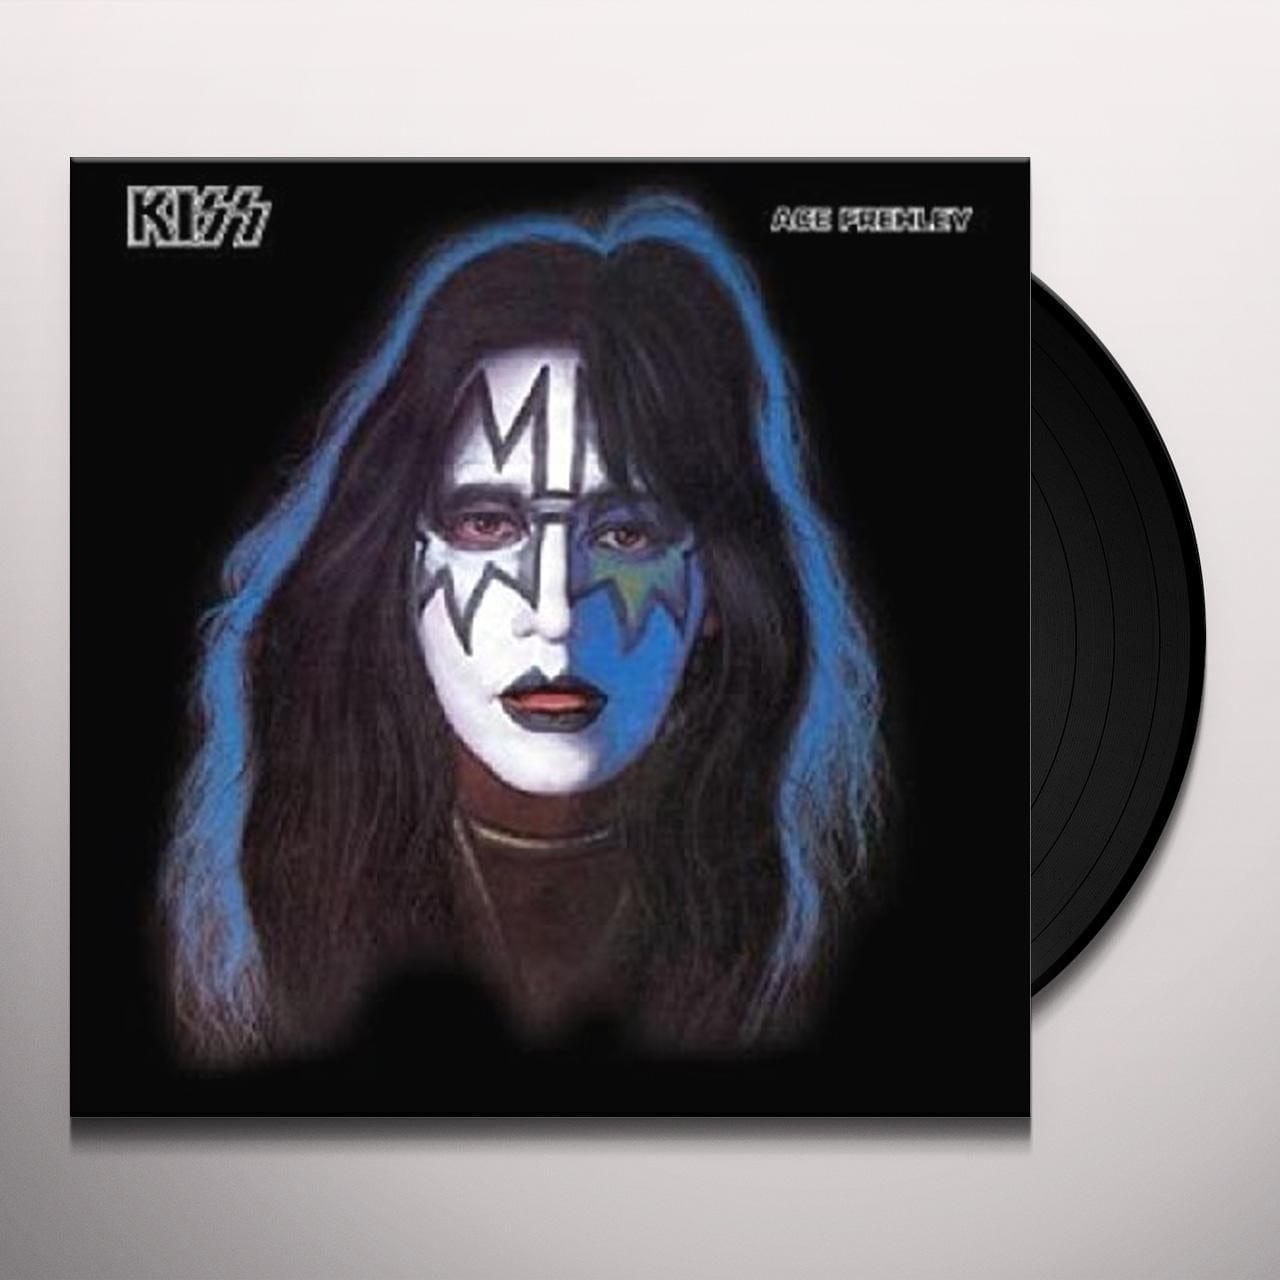 Kiss - Ace Frehley (Limited Edition, Remastered, 180 Gram) (LP) - Joco Records